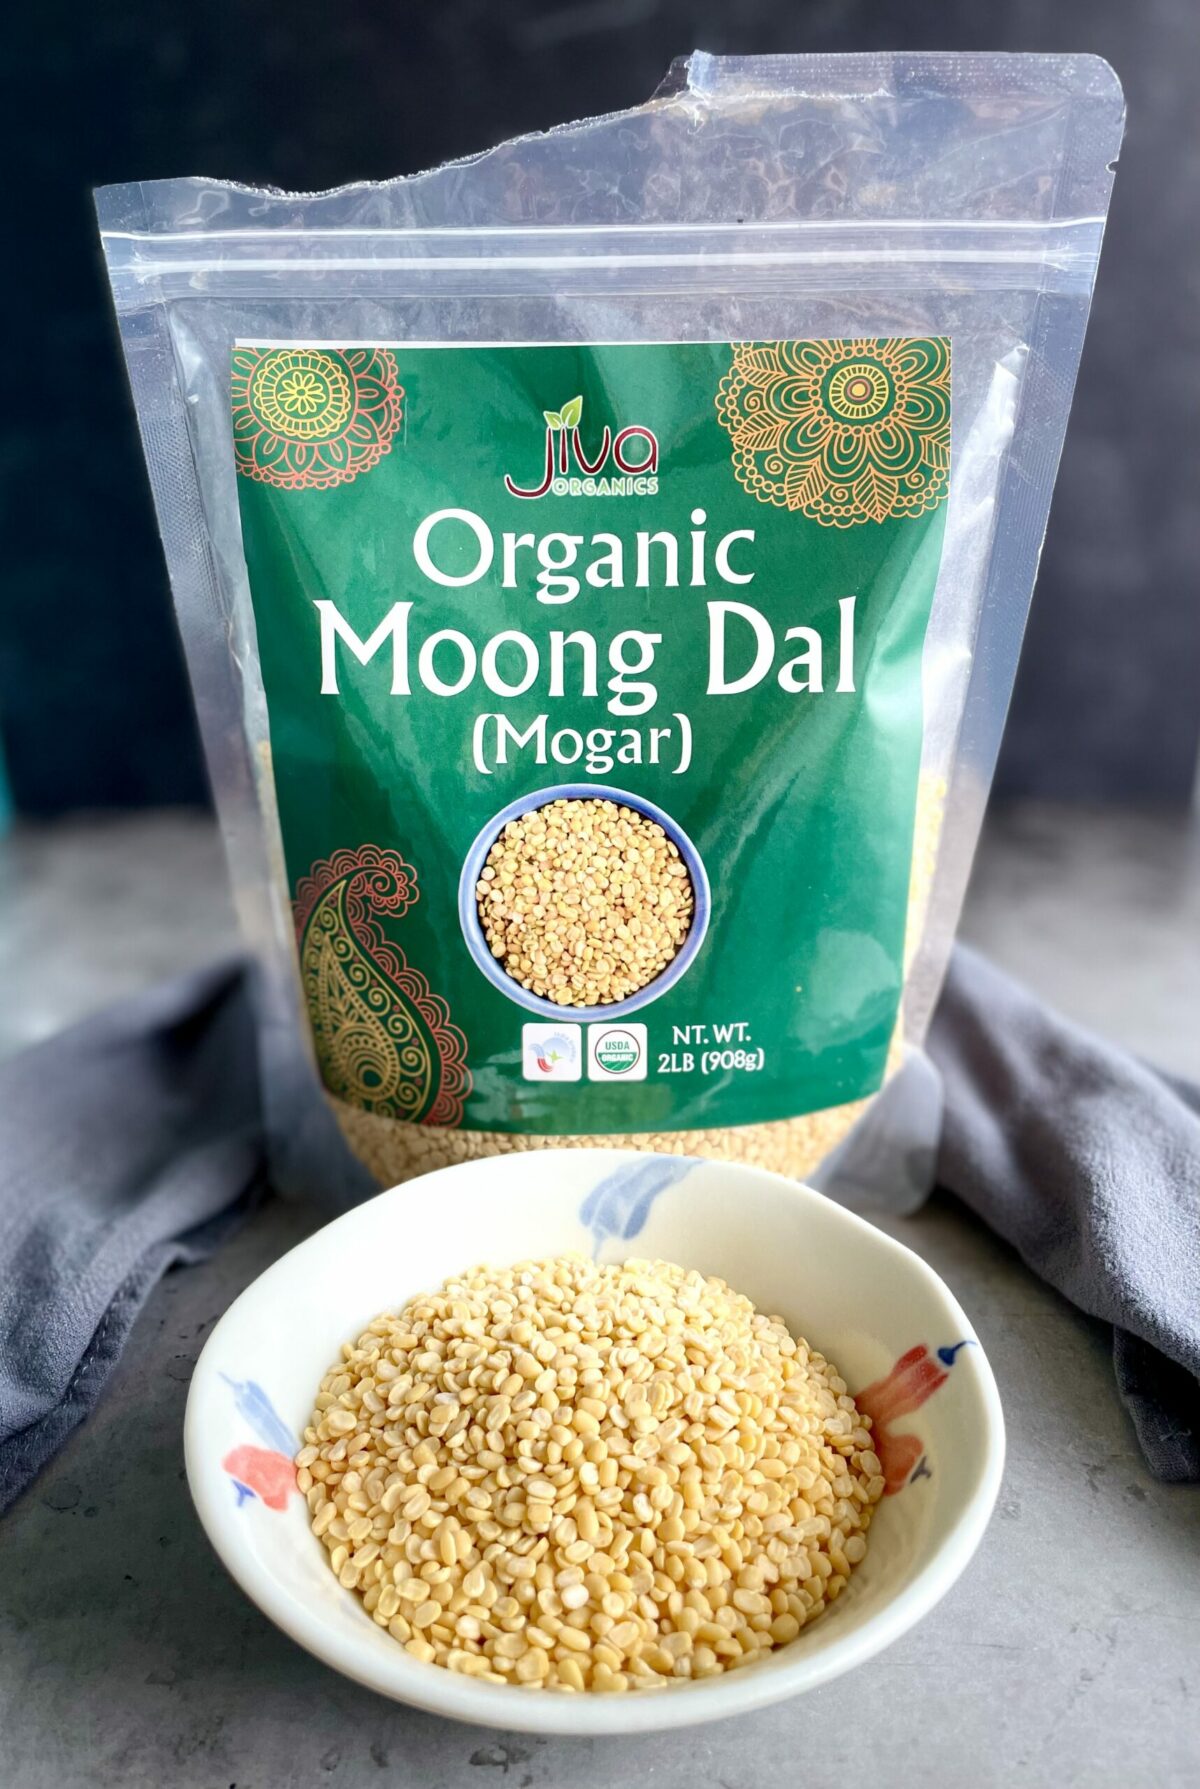 Jiva organic split moong dal (mogar daal) in packaging and displayed in a small bowl.